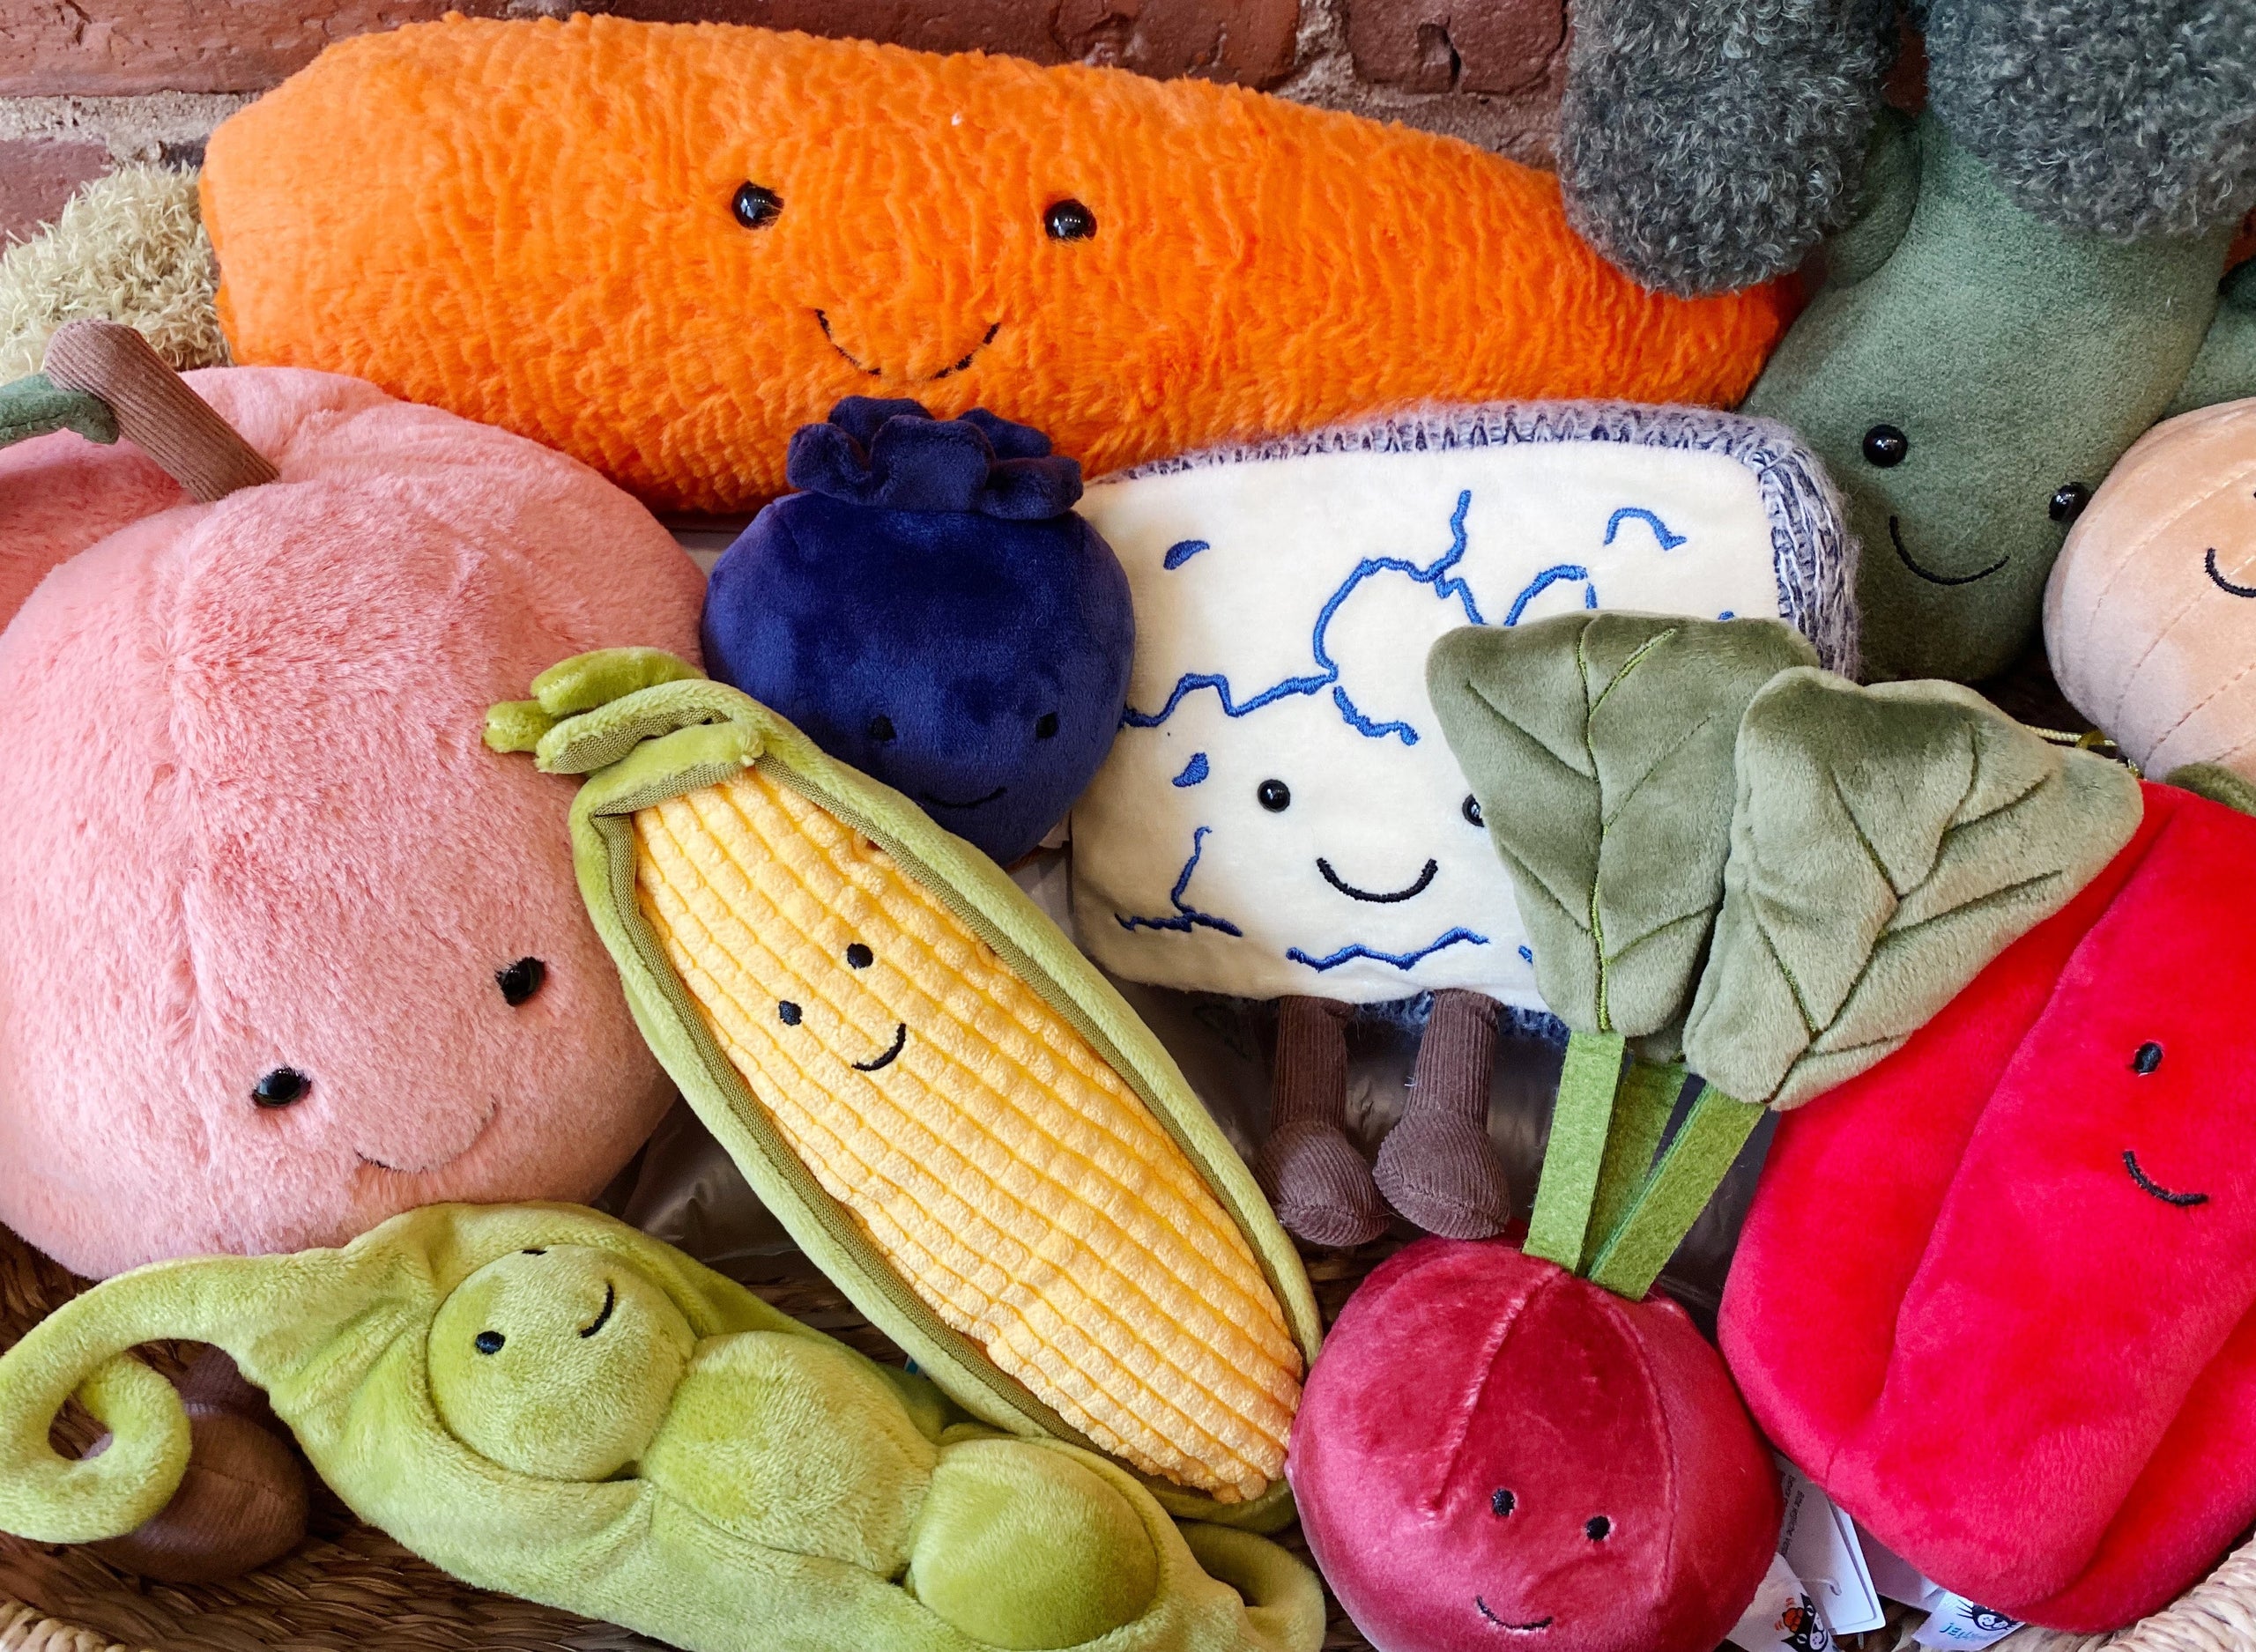 A group of stuffed toys.